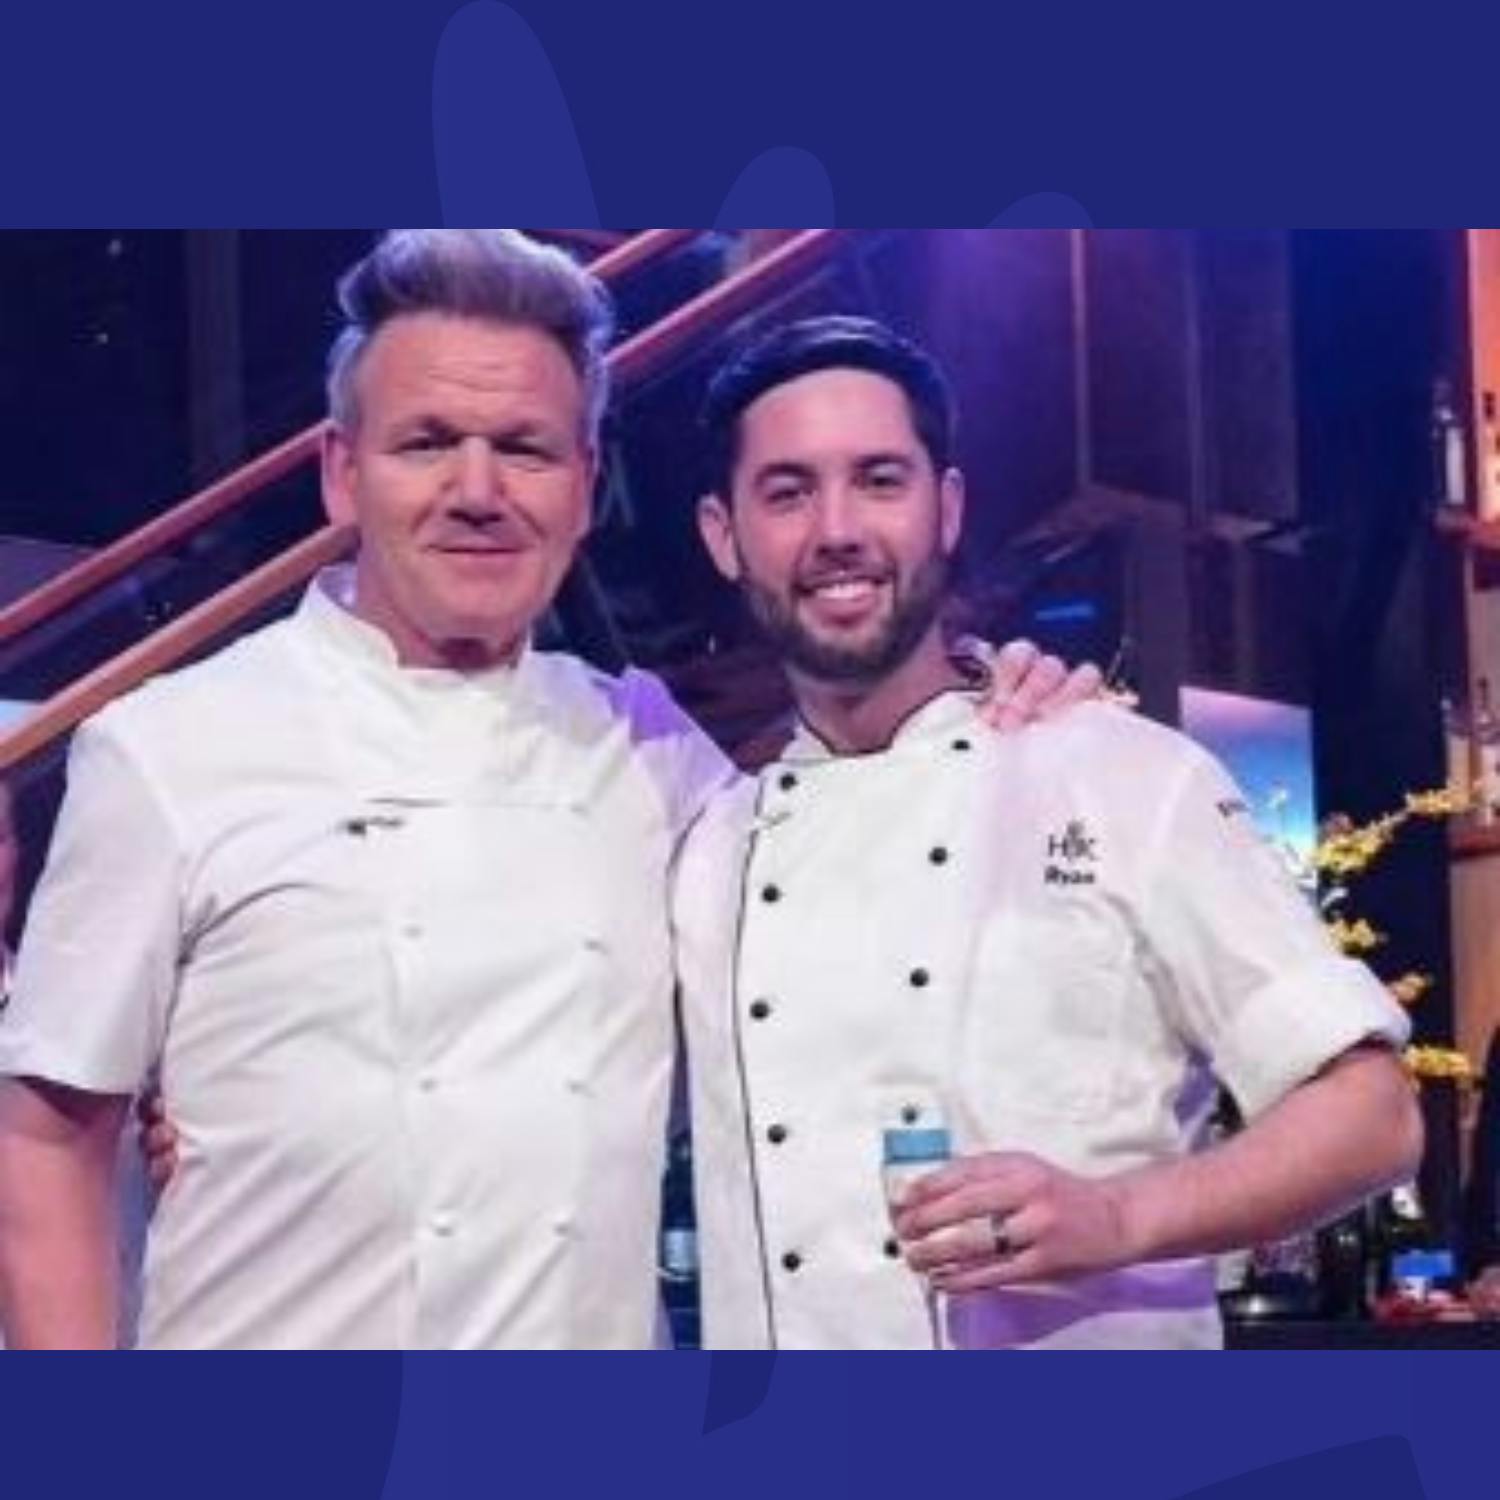 Cork Winner Of Hell's Kitchen USA Reveals His Incredible Journey